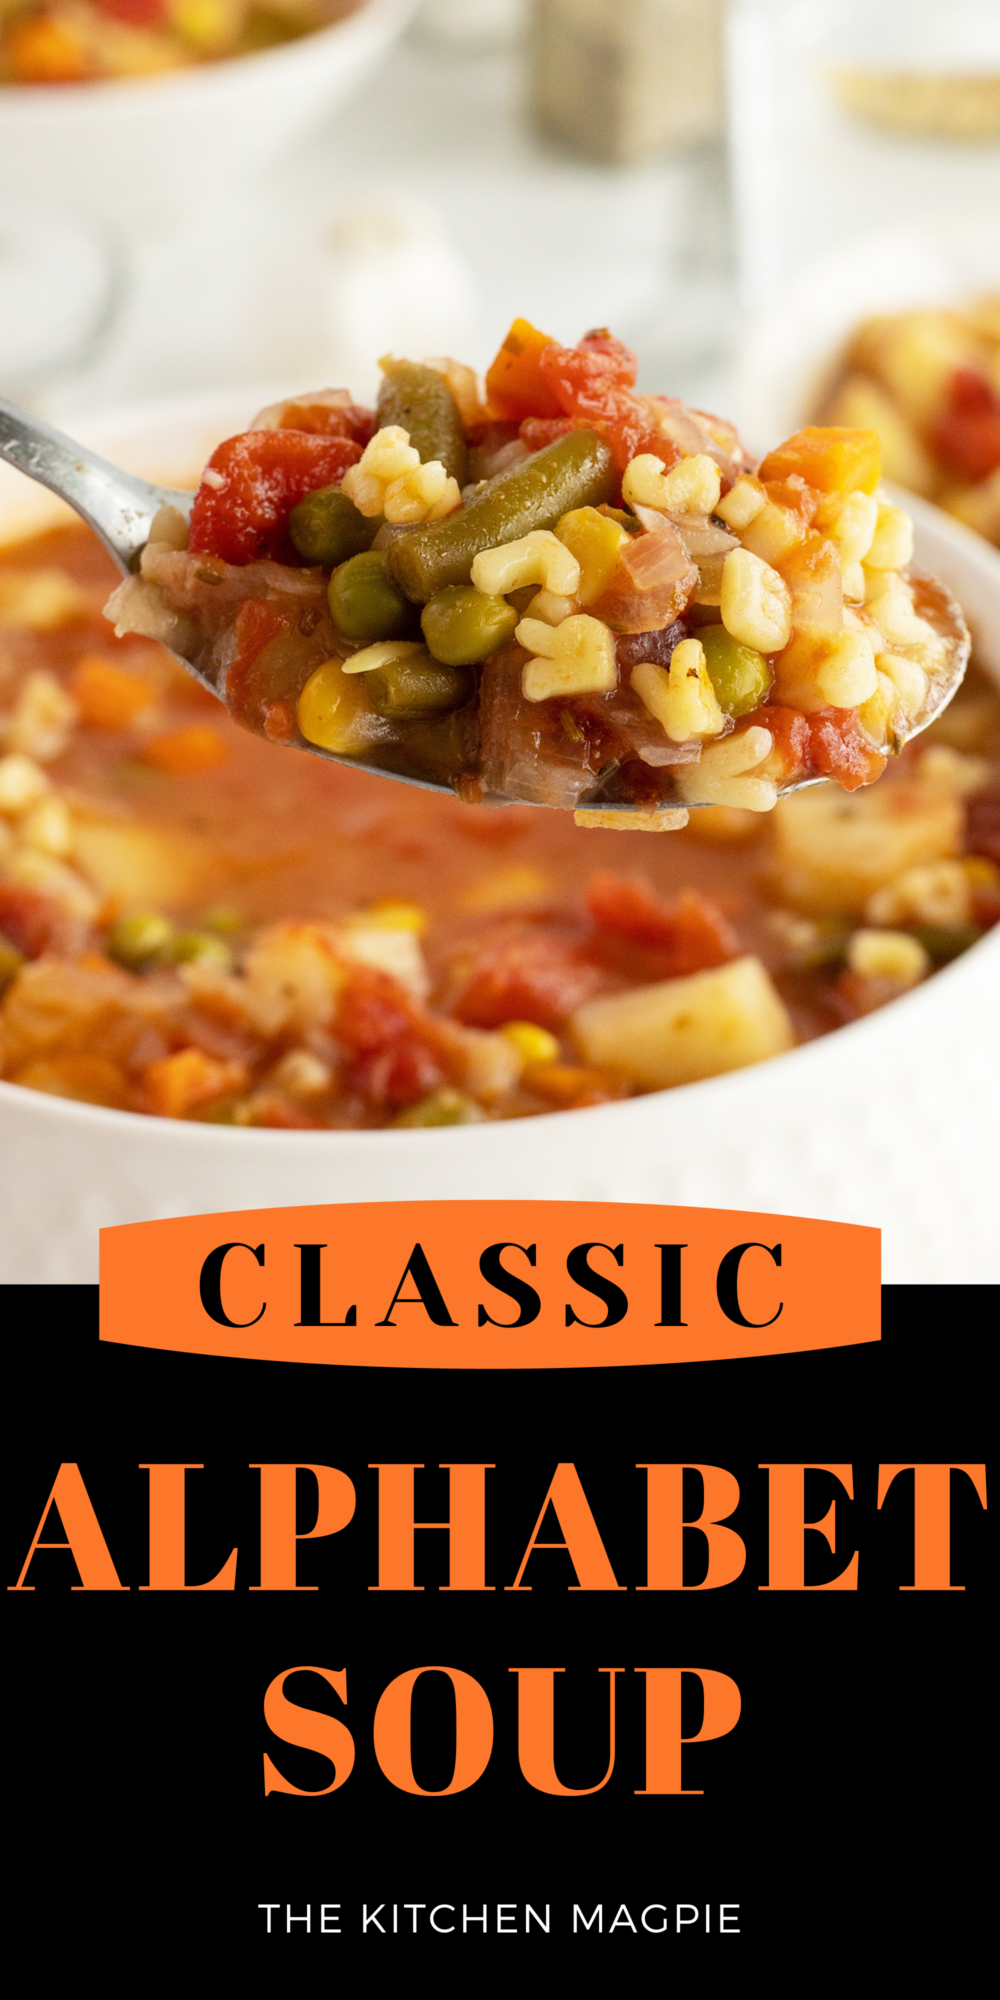 Want something classic and comforting for lunch this winter season? Why not learn how to make your very own alphabet soup from your childhood?